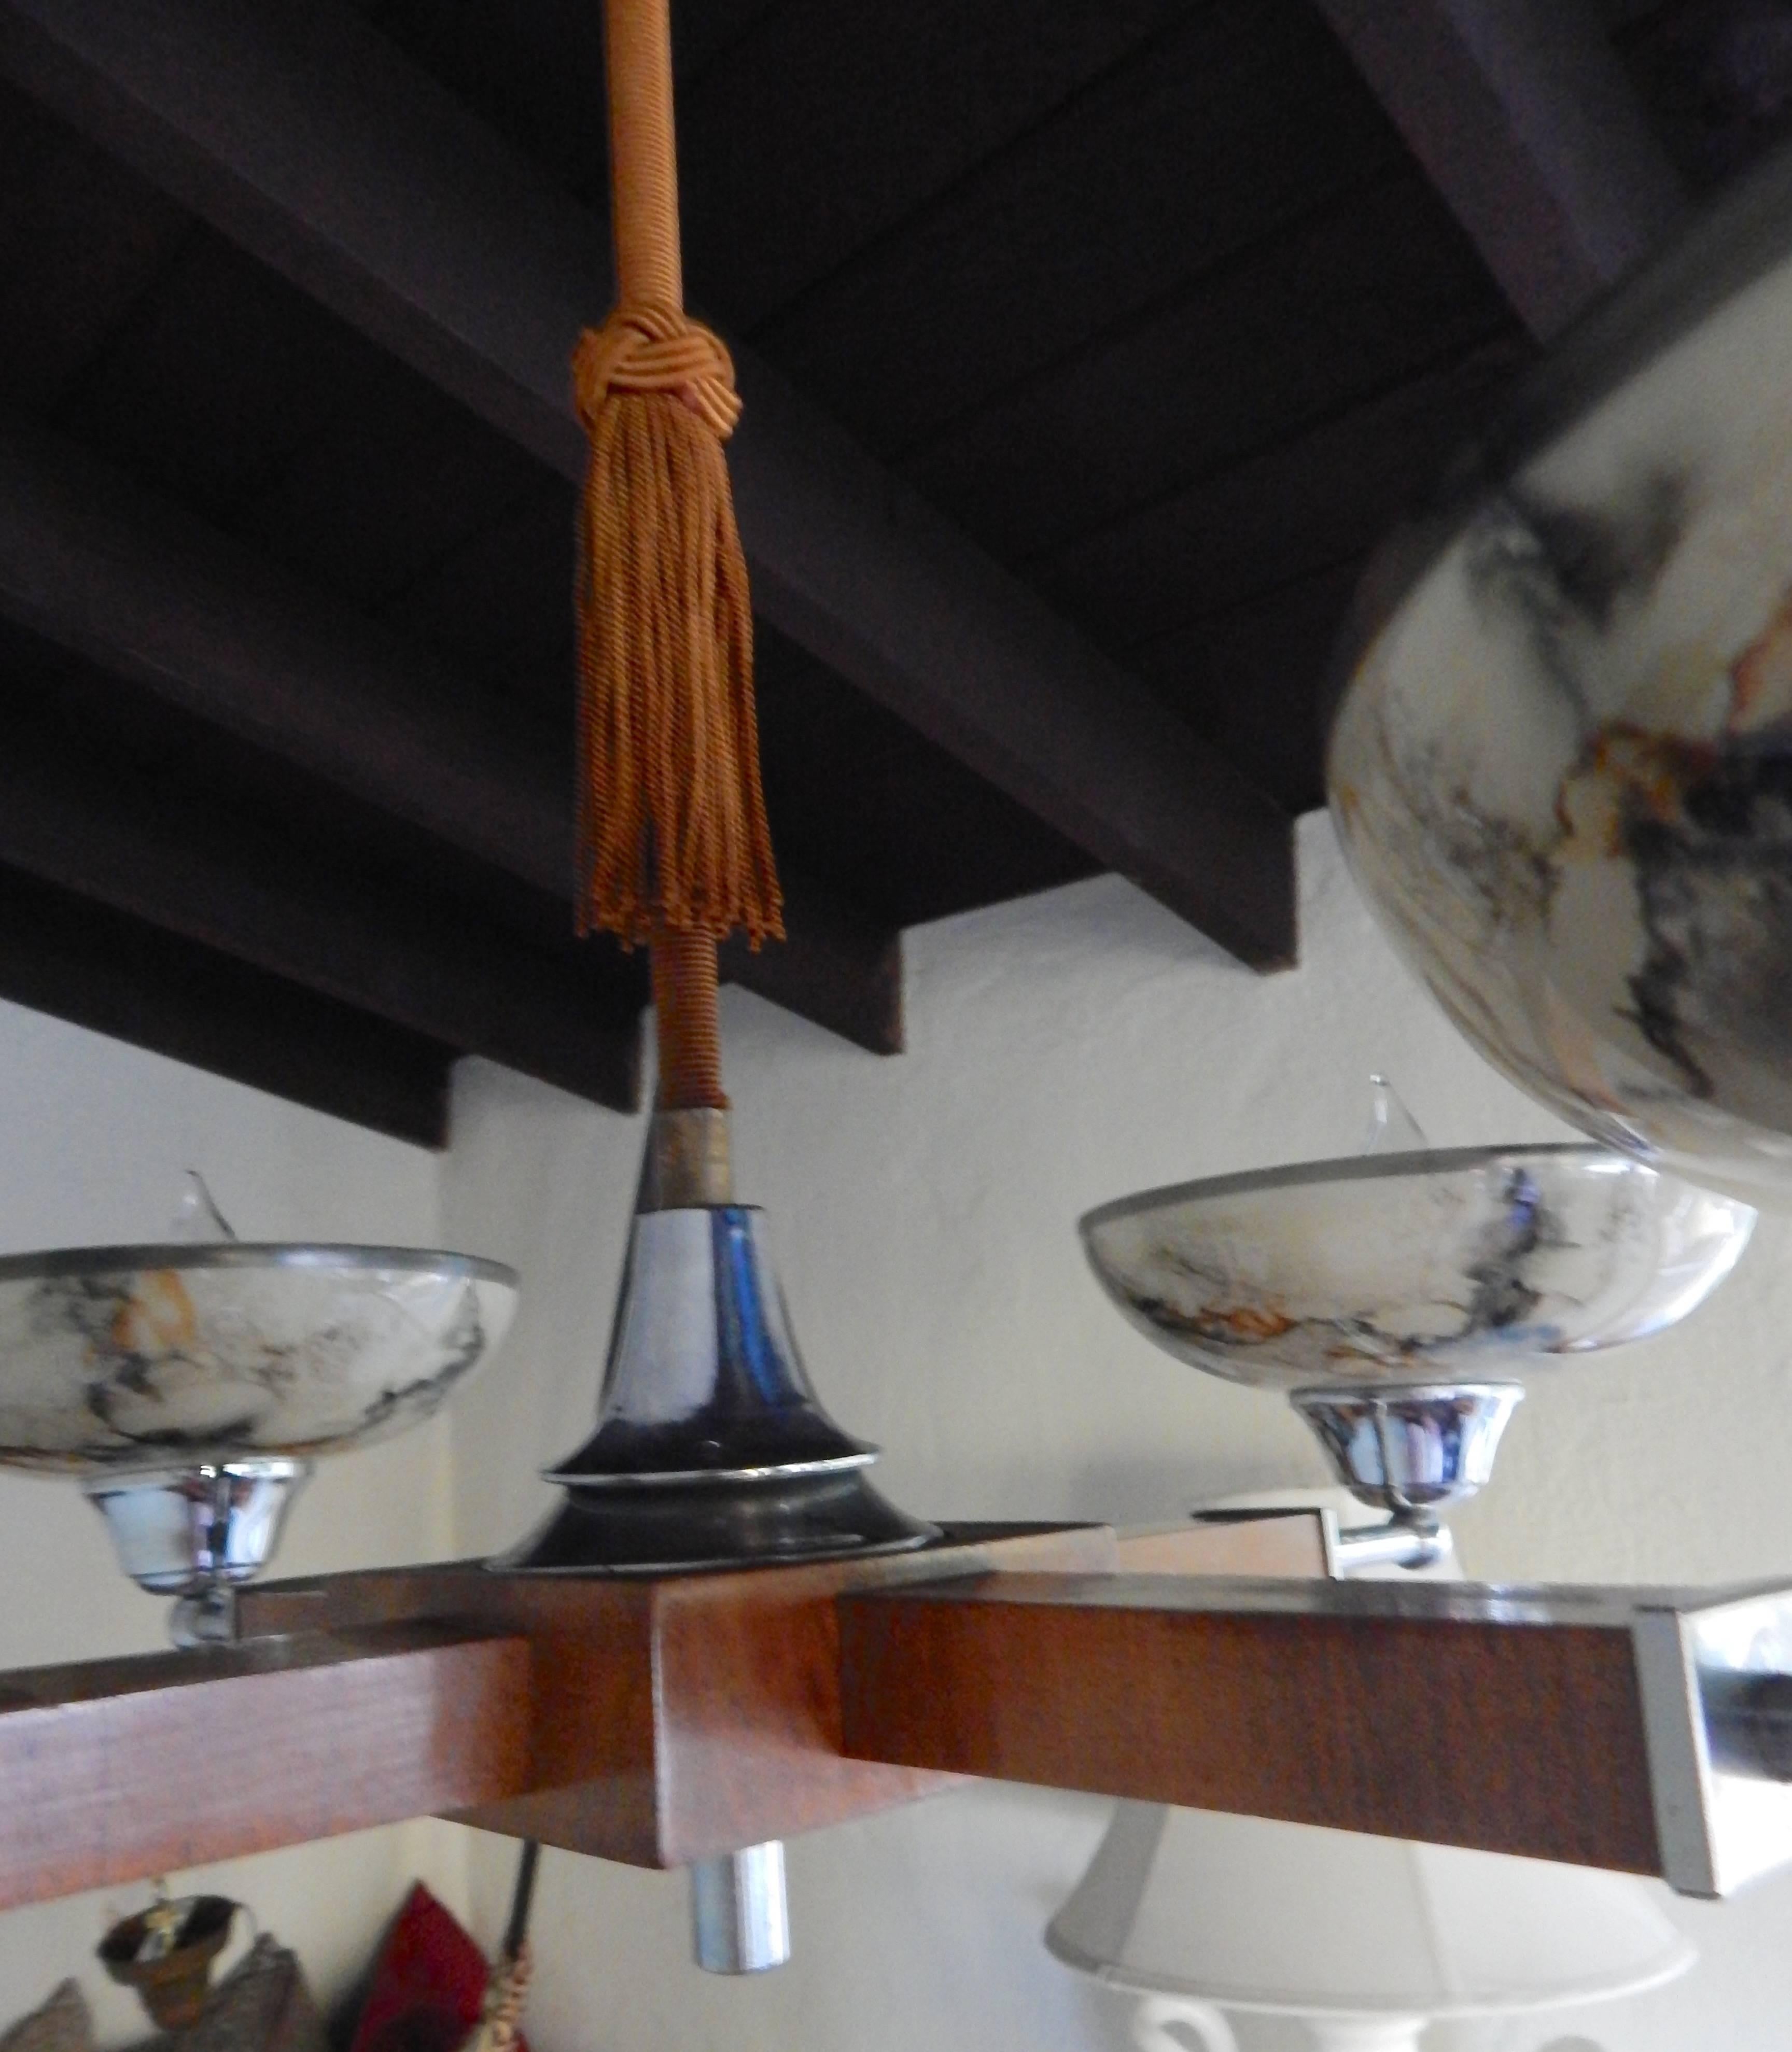 Mid-20th Century Swedish Mid-Century Modern Hanging Fixture in Wood, Chrome and Glass